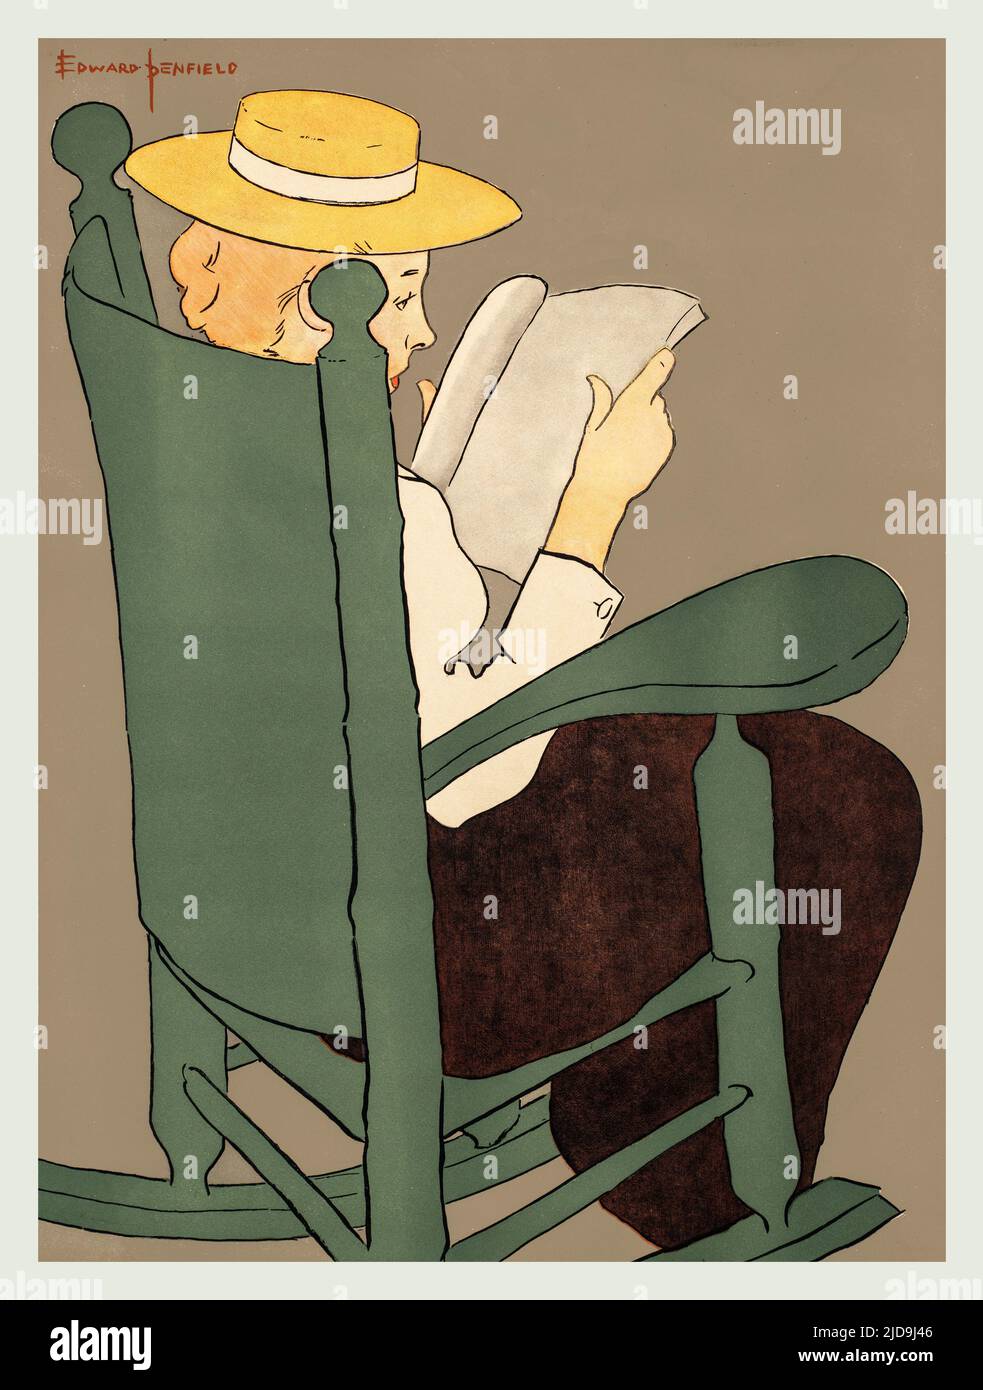 A detail from a turn of the 20th century illustration by Edward Penfield (1866-1925) considered by many to be the father of the American poster. Featuring a woman reading while sitting on a rocking chair. Originally a cover to Harper’s Magazine, the oldest general-interest monthly in America. Stock Photo